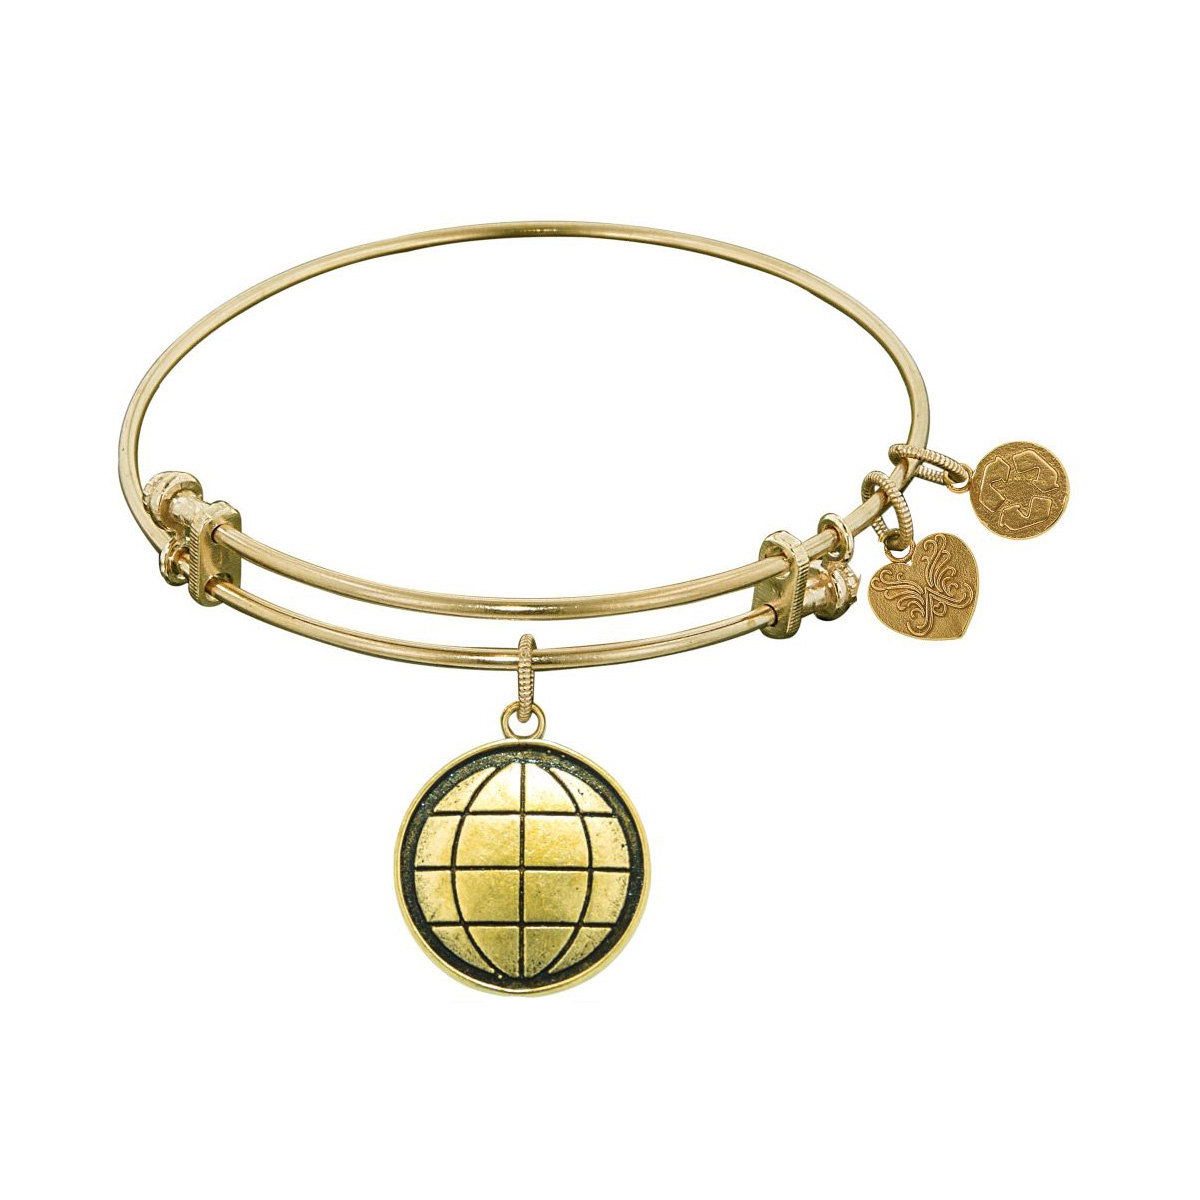 Angelica Smooth Finish Brass Earth Angelica Bangle Bracelet, 7.25"